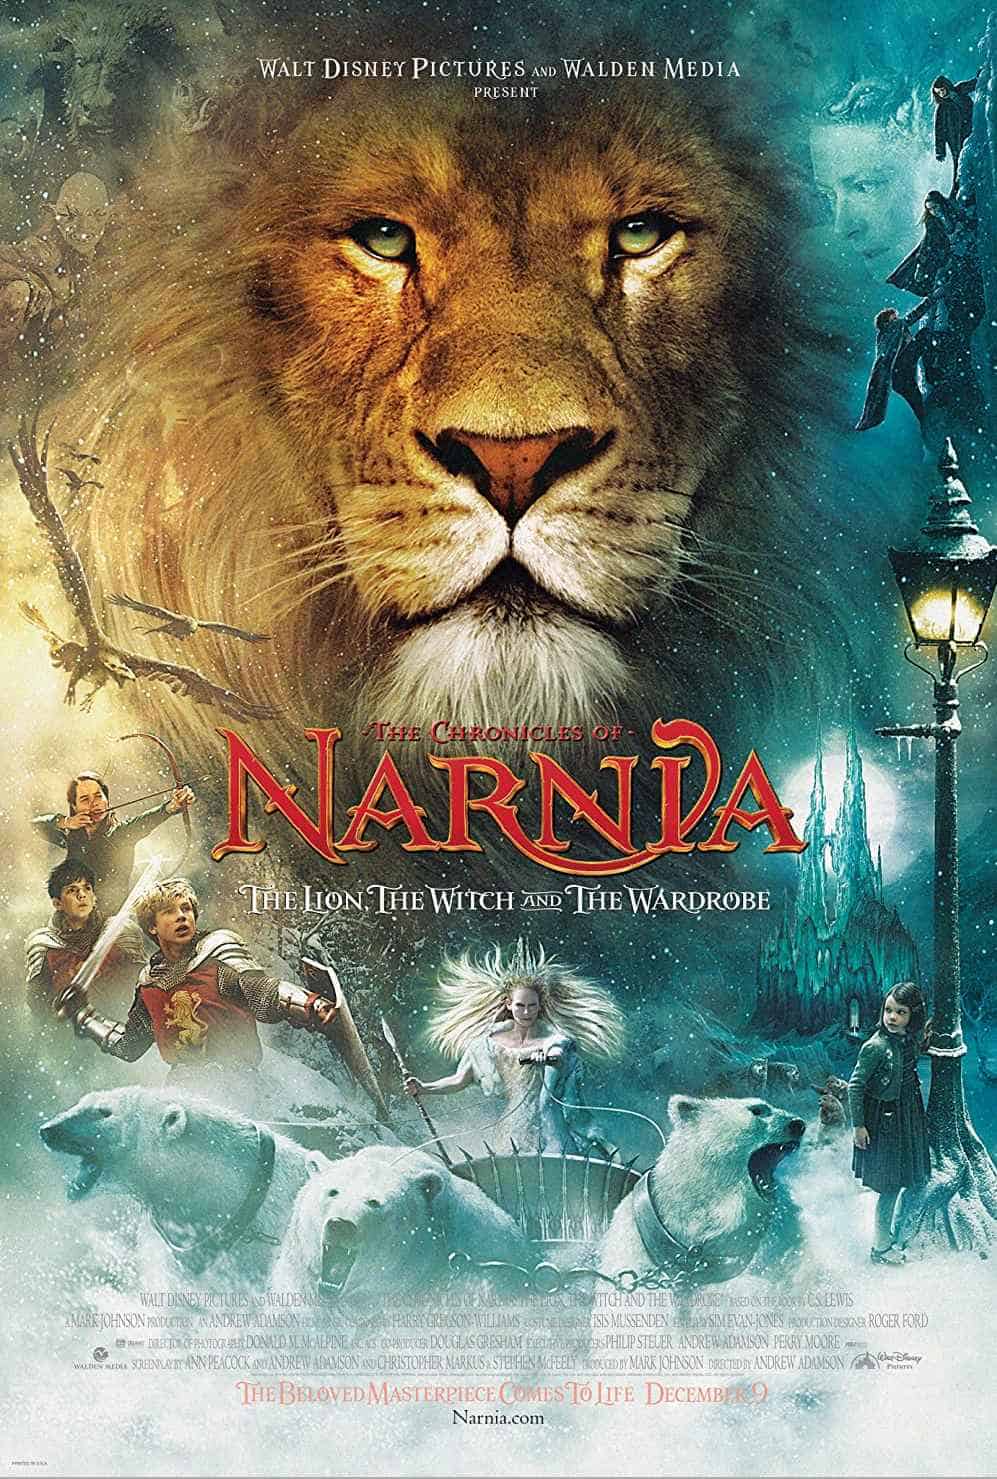 list of Harry Potter movies in order The Chronicles of Narnia The Lion, the Witch and the Wardrobe